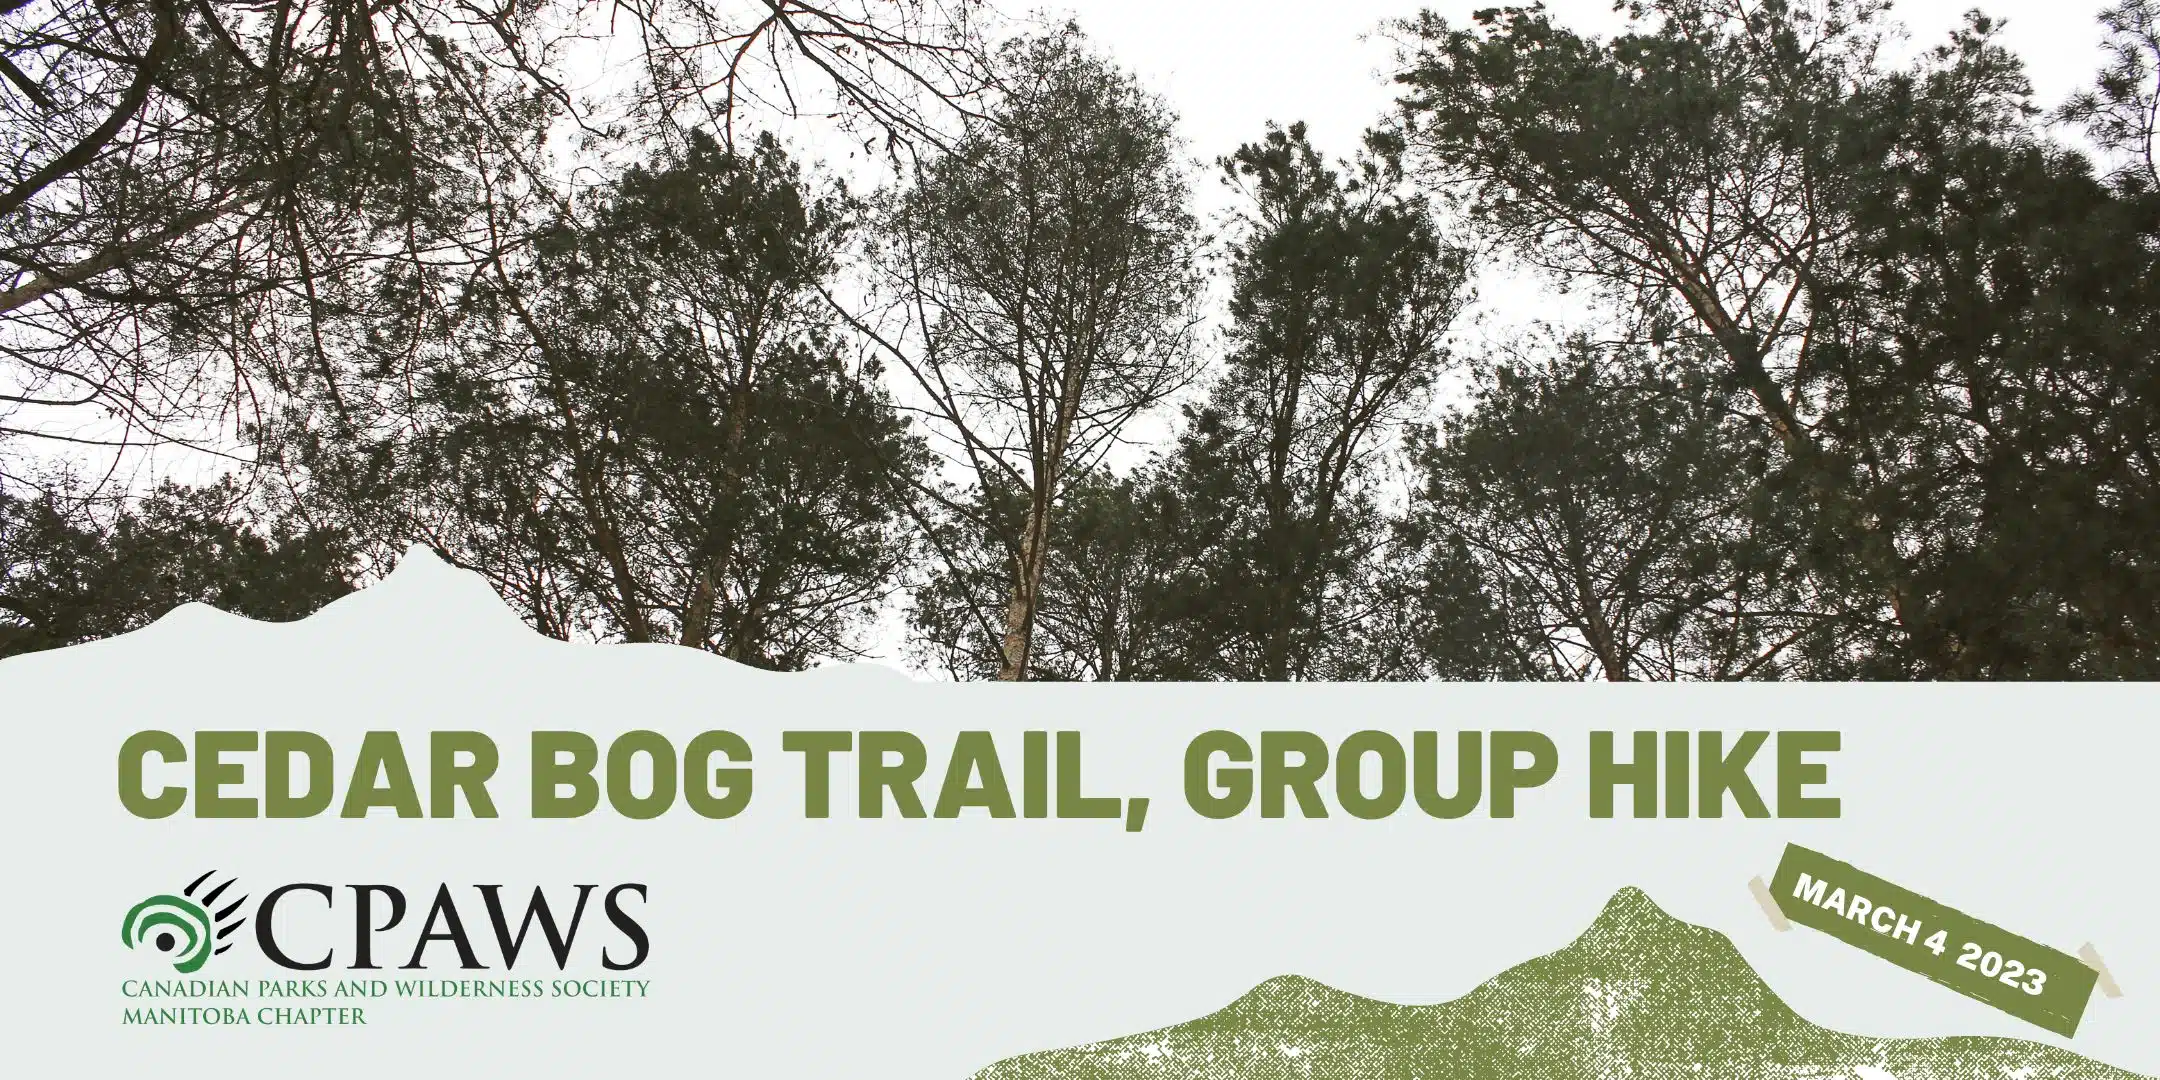 Group Hike being hosted for free at the Birds Hill Provincial Parks Cedar Bog Trail in the early spring of 2023.